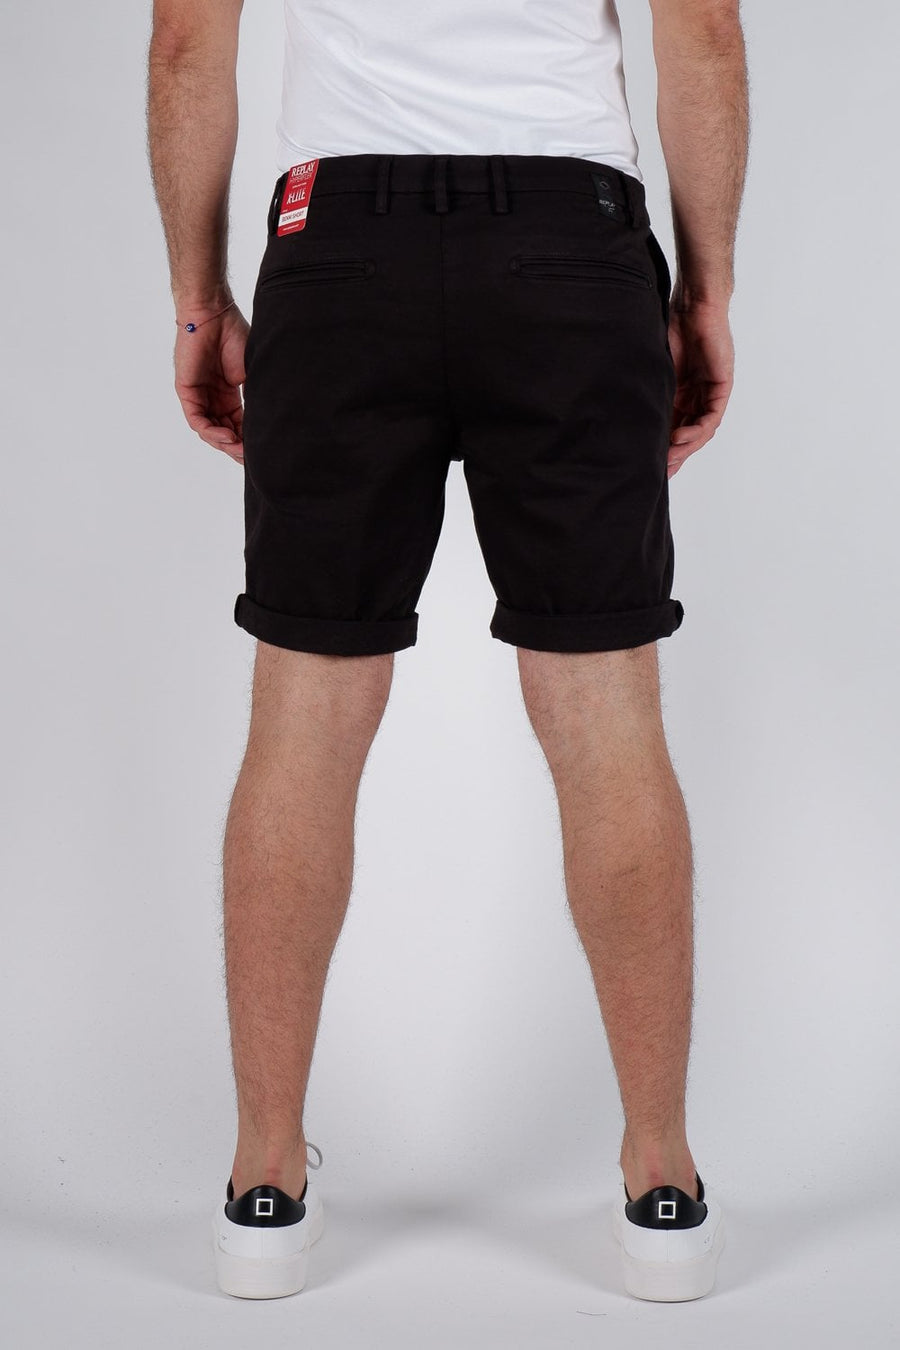 Buy the Replay Hyperflex X-L.I.T.E.Benni Short in Black at Intro. Spend £50 for free UK delivery. Official stockists. We ship worldwide.